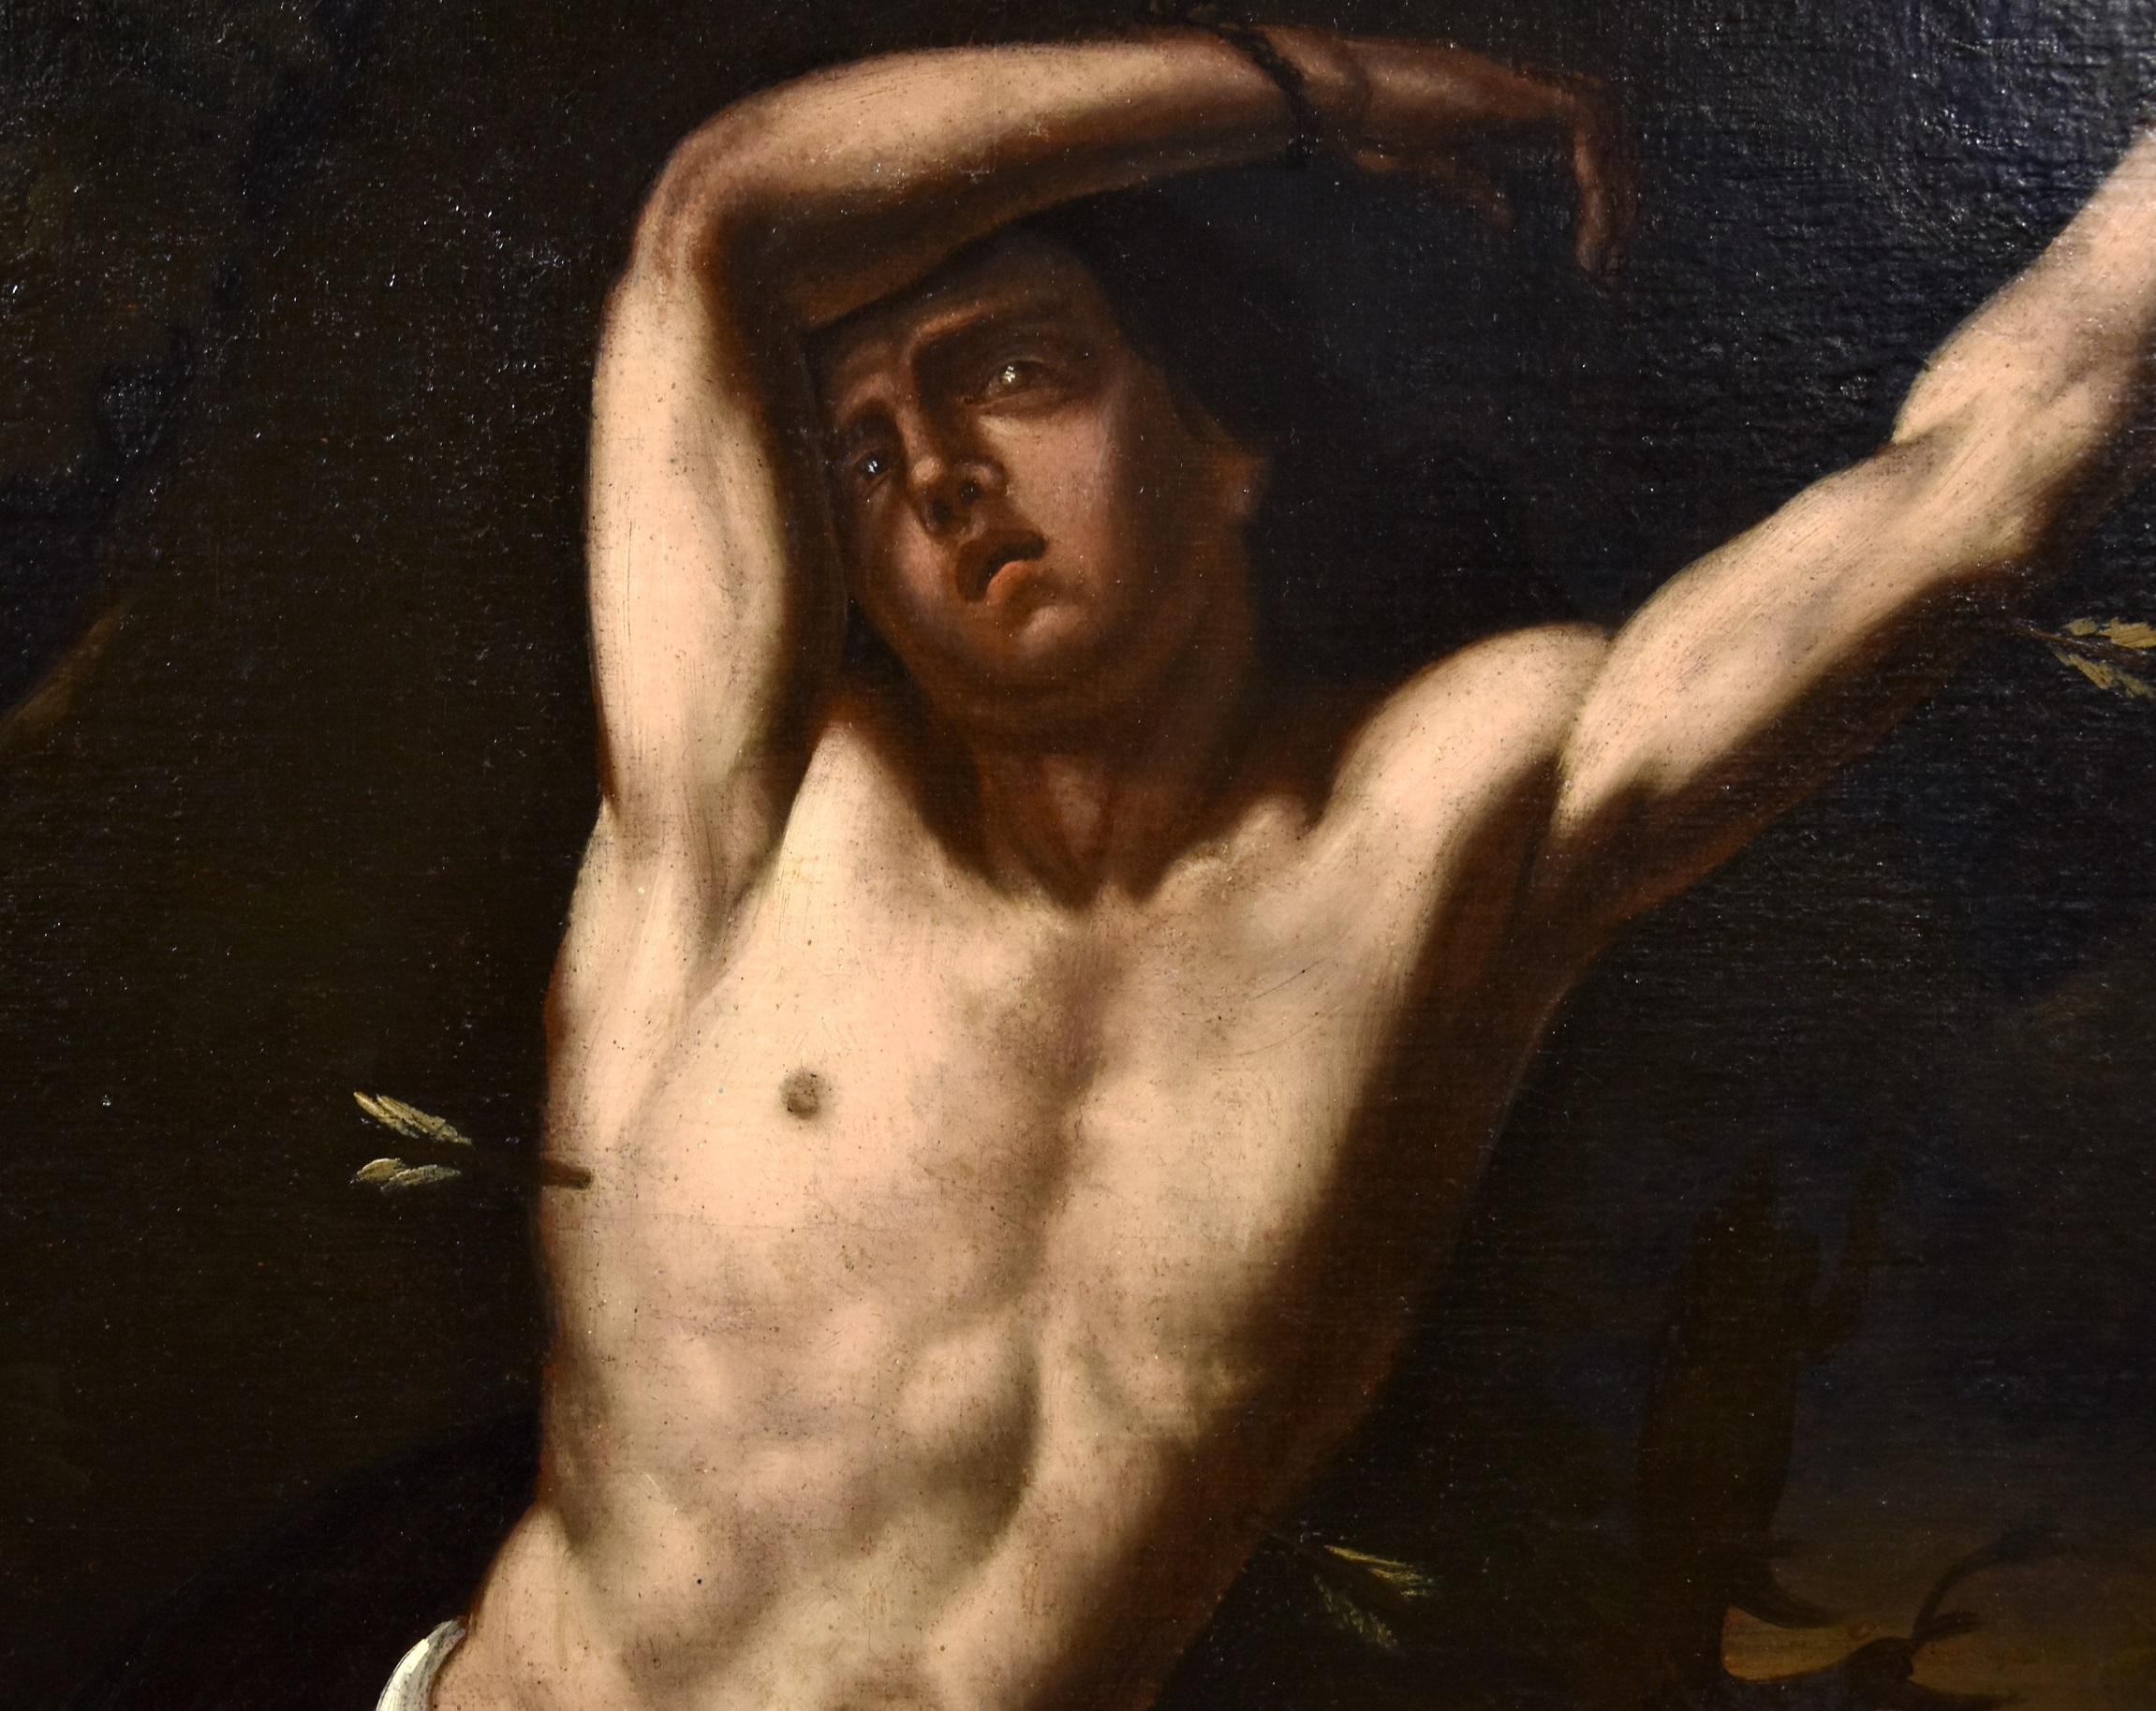 San Sebastian
Lombard painter of the seventeenth century - Circle of Daniele Crespi (Busto Arsizio, 1597-1600 - Milan 1630)

oil painting on canvas
Measurements: 96 x 73 cm., In frame 105 x 82 cm.

Saint Sebastian, soldier and martyr of Christ, is a